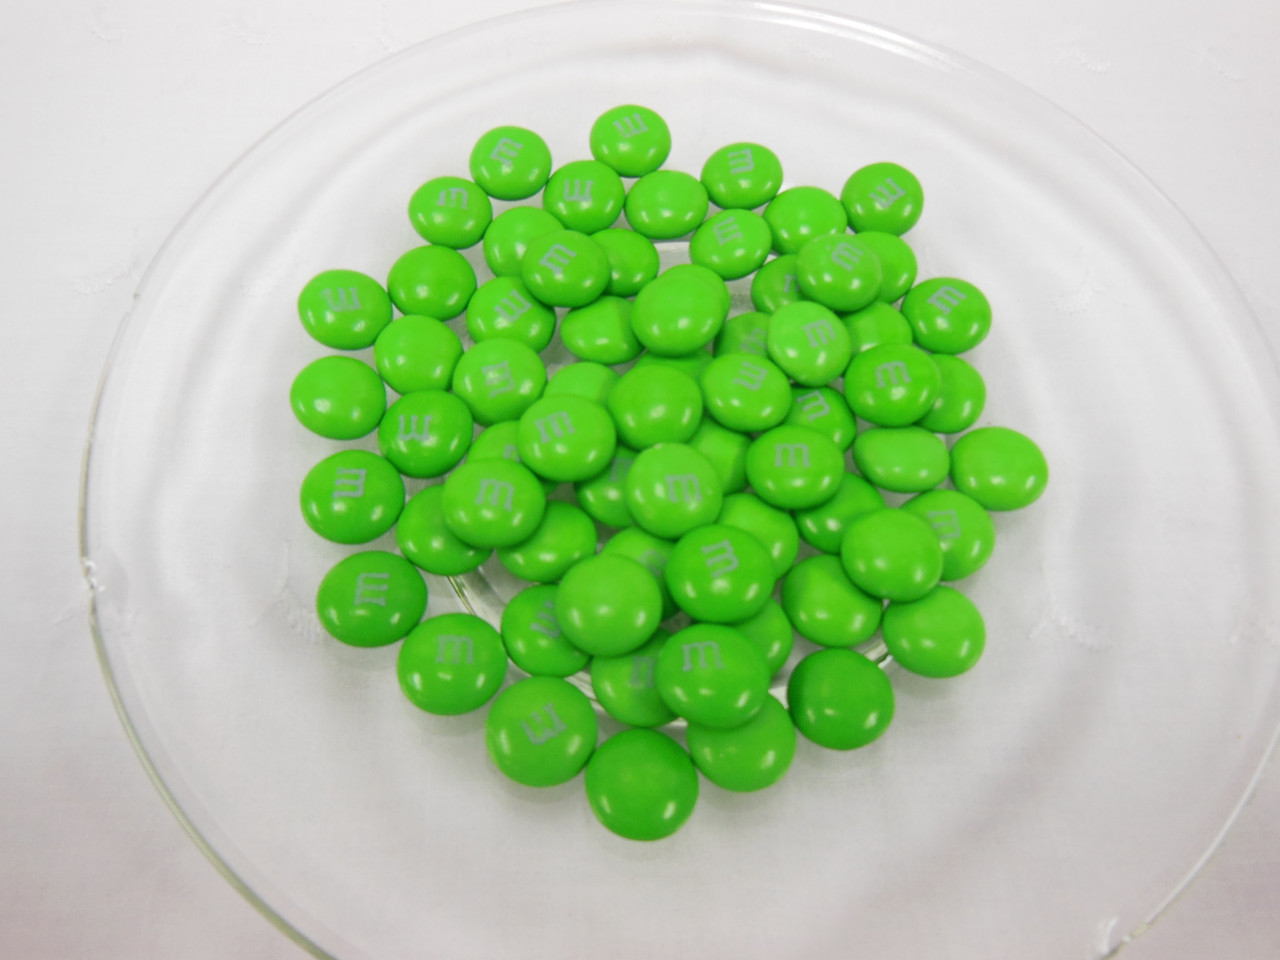 My M&M's Chocolate Candy Green 1 LB (453g)